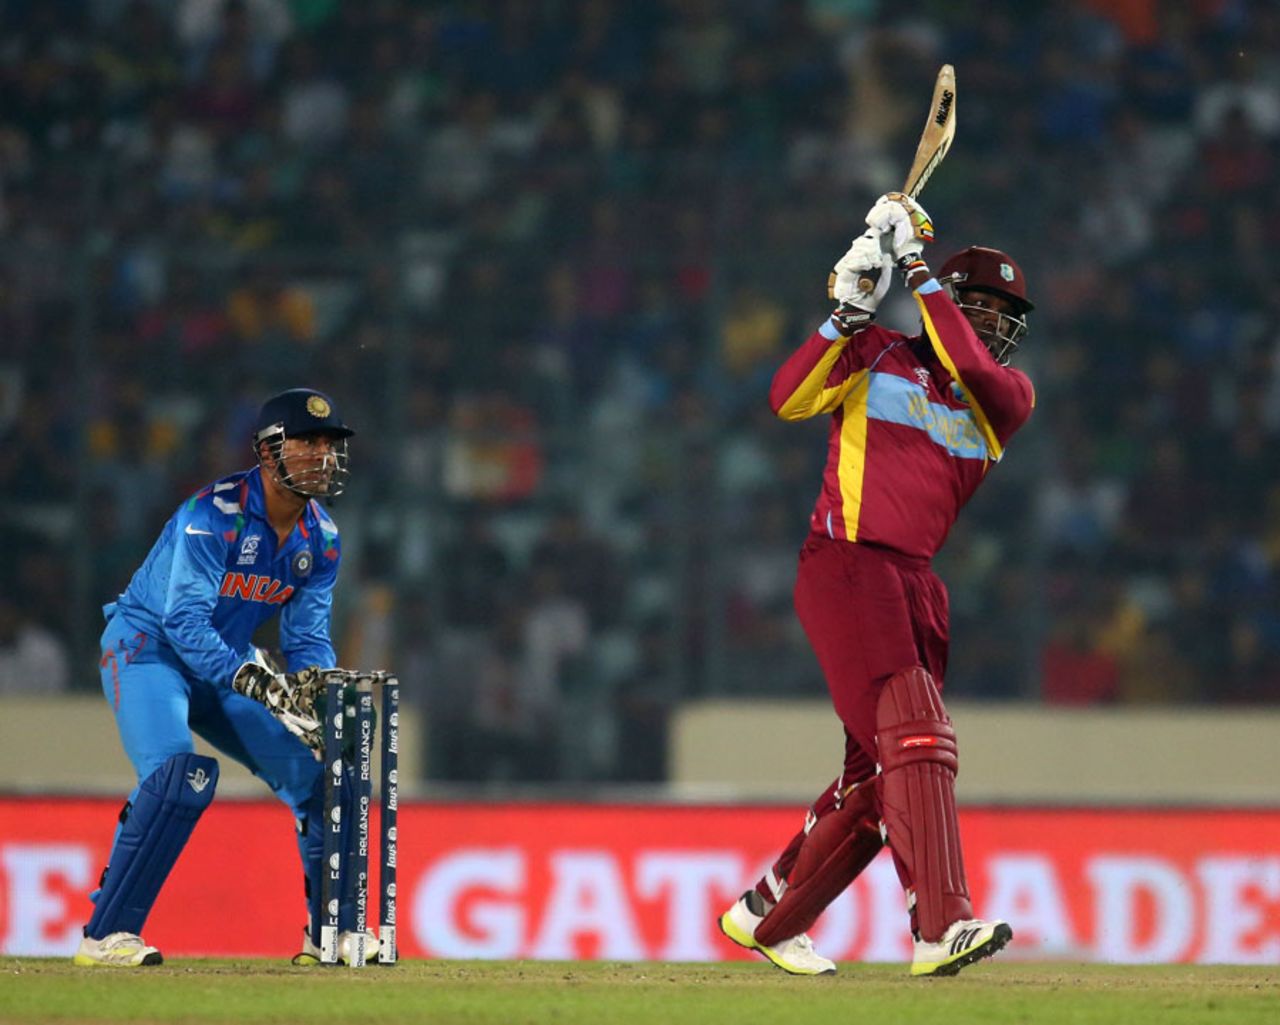 Chris Gayle launches the ball out of the ground, India v West Indies, World T20, Group 2, Mirpur, March 23, 2014